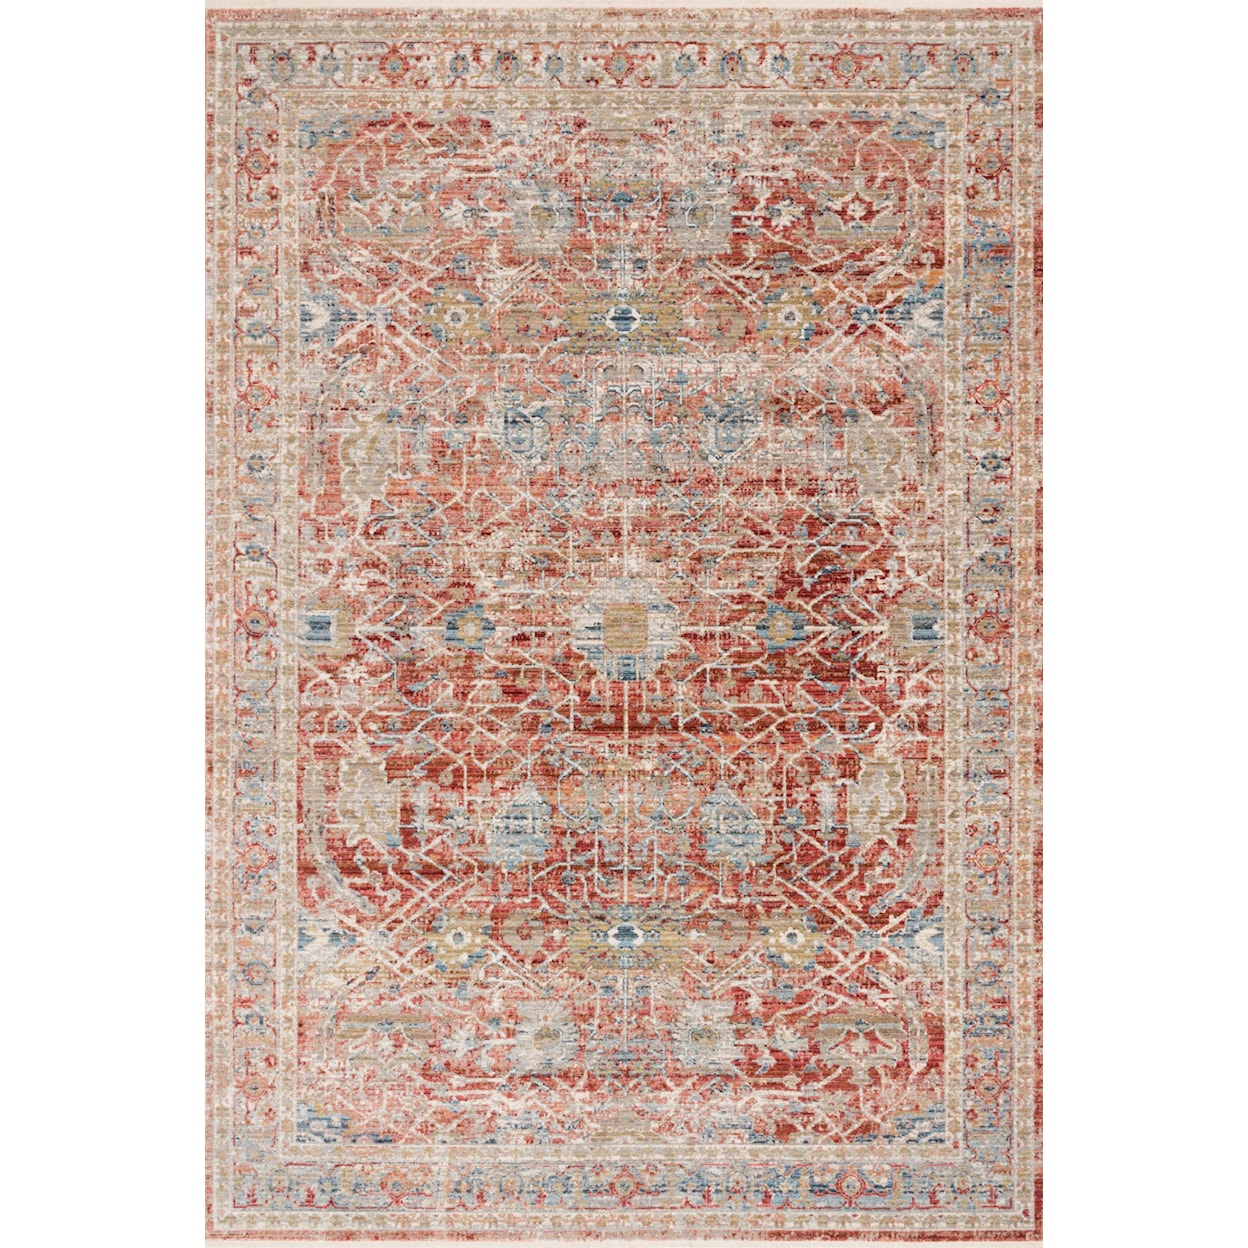 Reeds Rugs Claire 9'6" x 13' Red / Ivory Rug